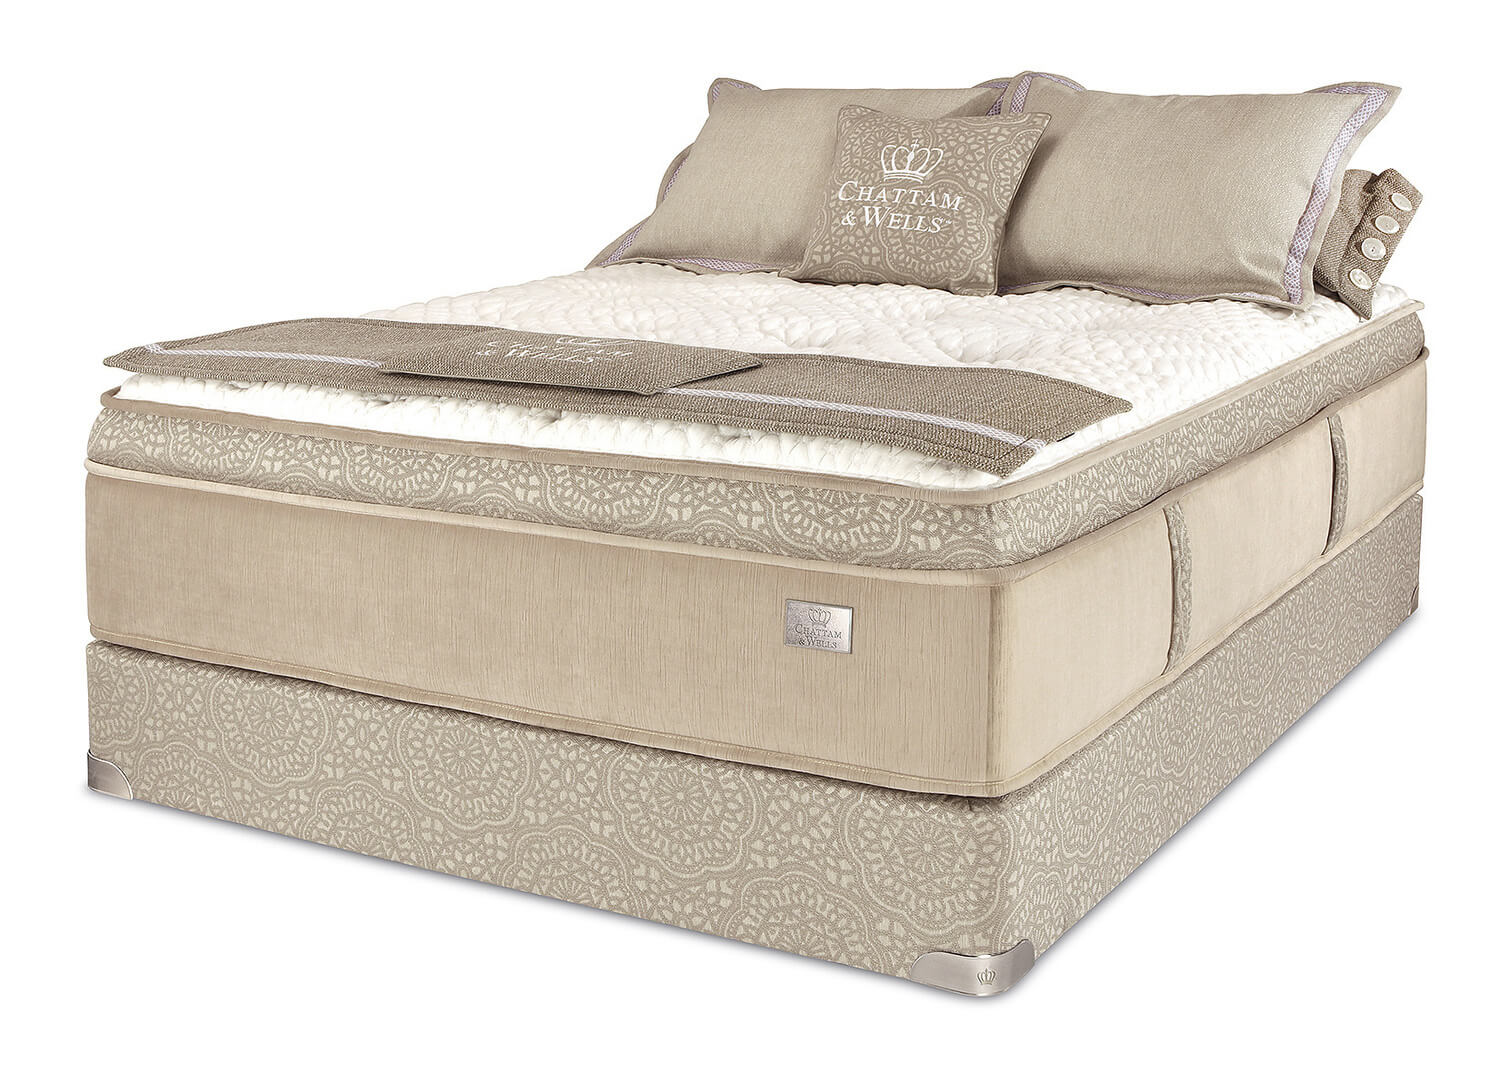 chattam and wells mattress olivia review